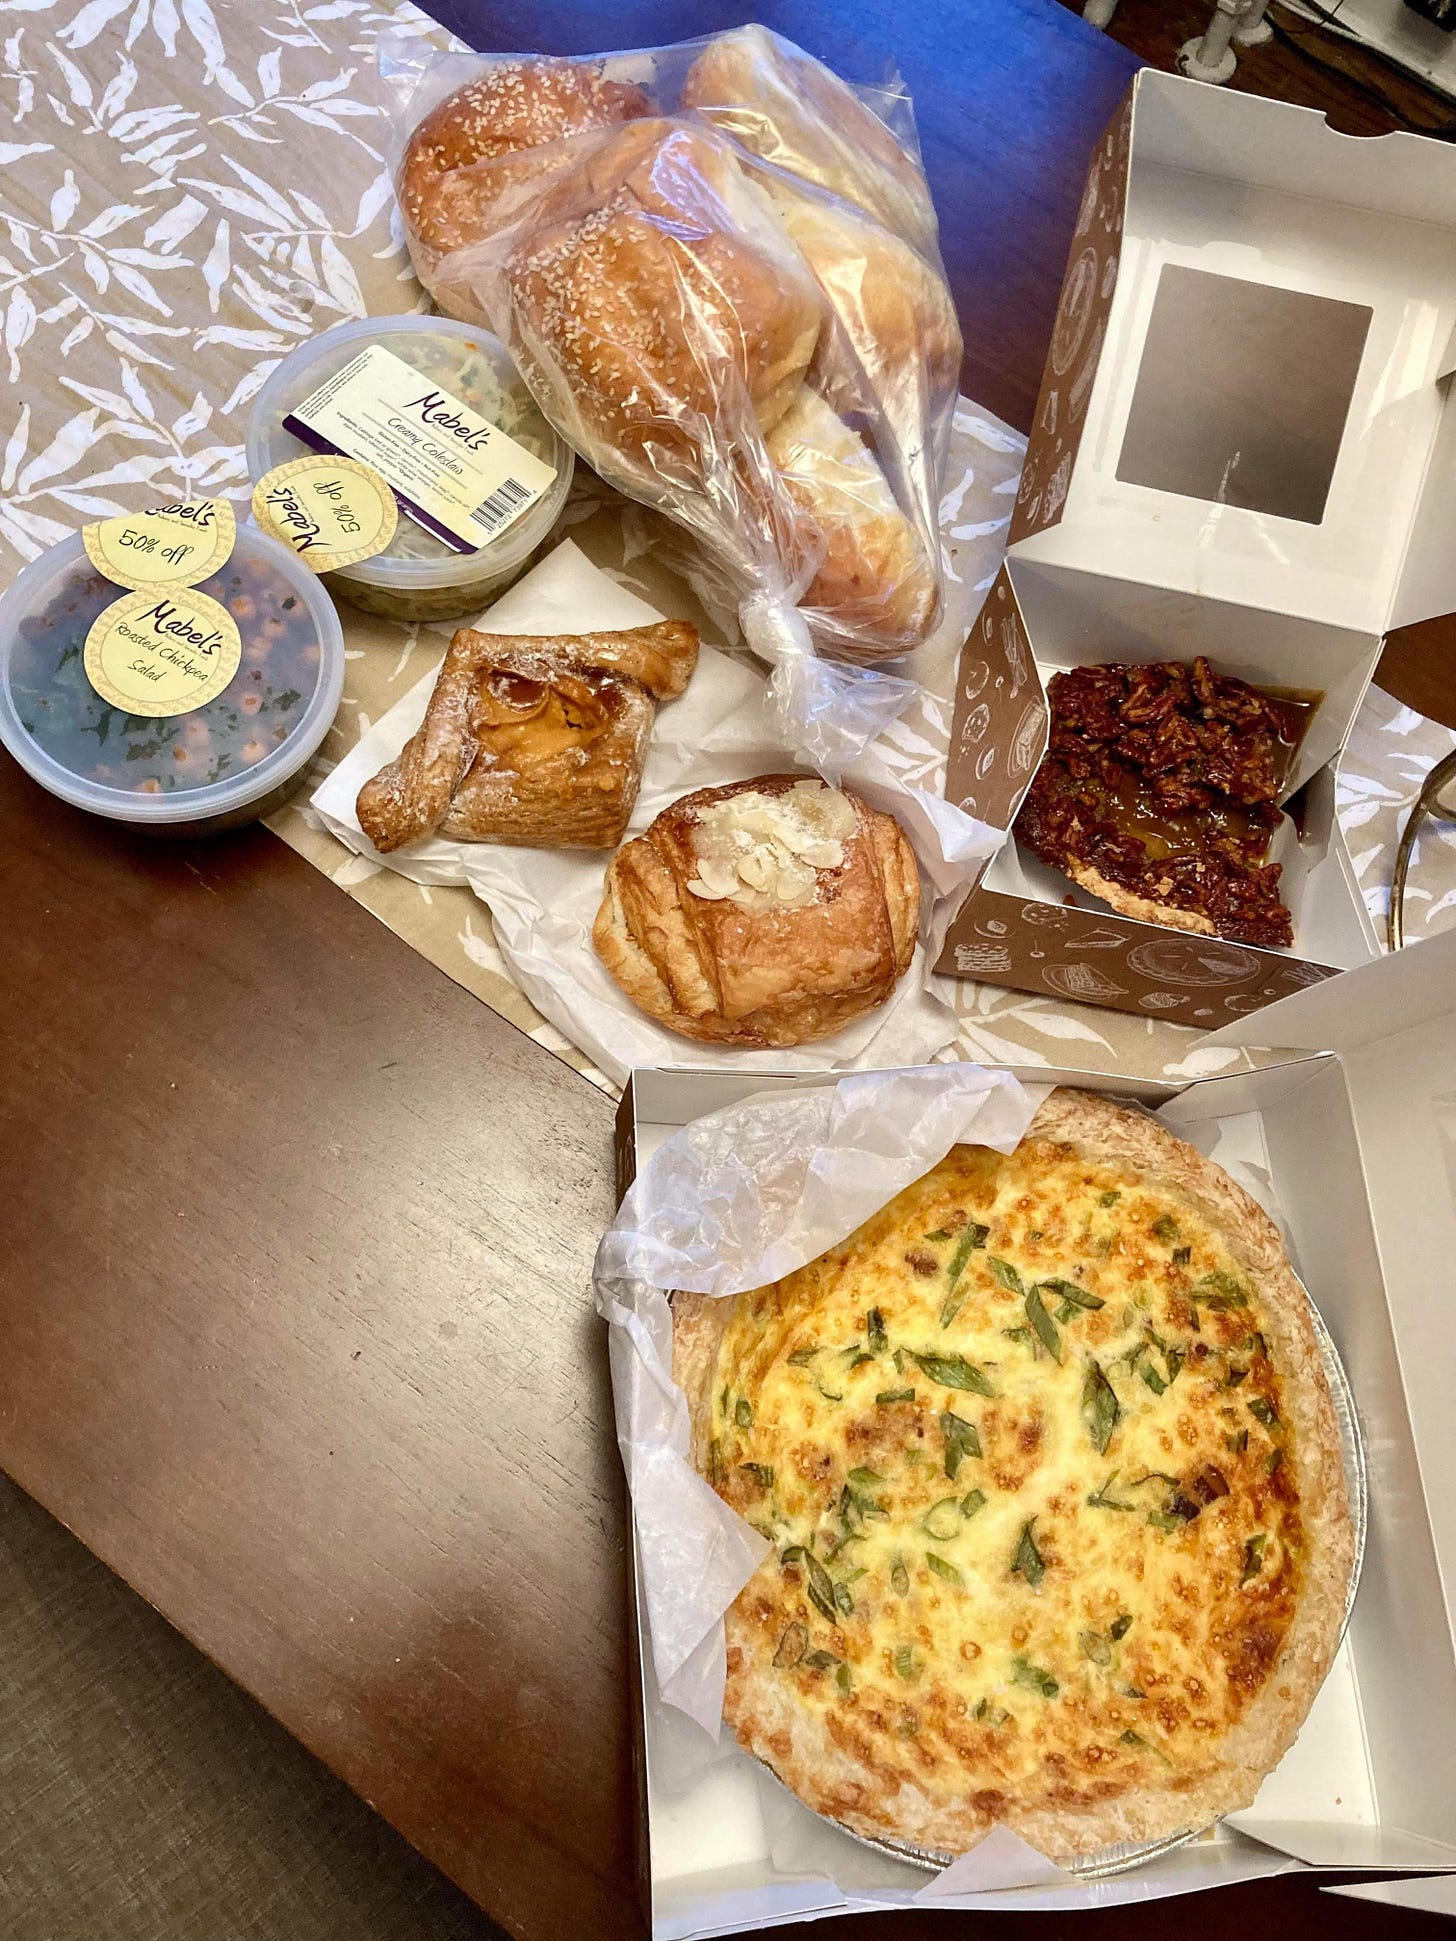 Spread of food including a full quiche, three pastries, two salads, and bag of buns